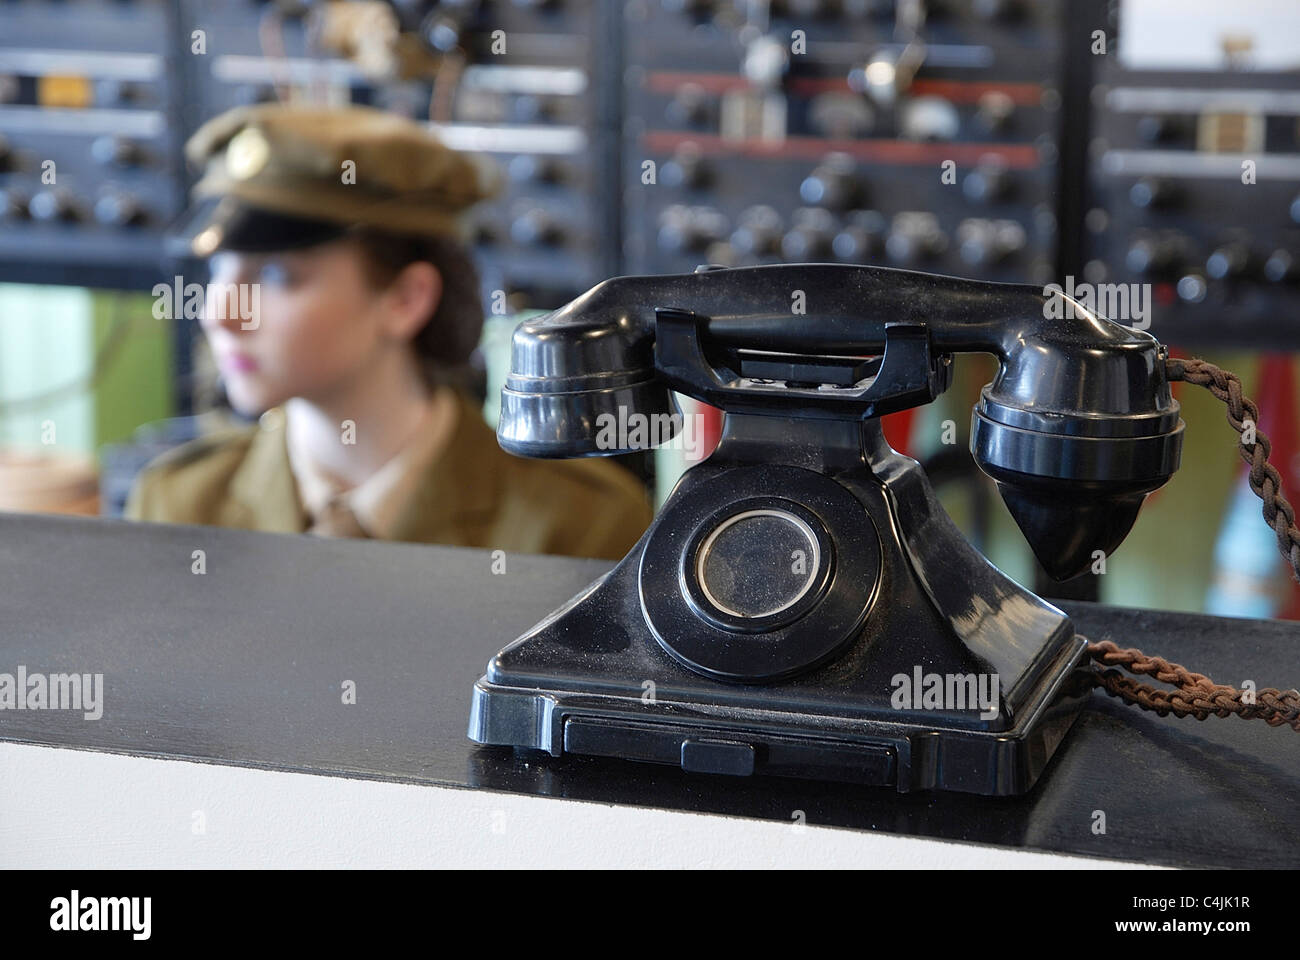 Hot-line telephone at The Tunny Gallery, The National Museum of Computing. Stock Photo